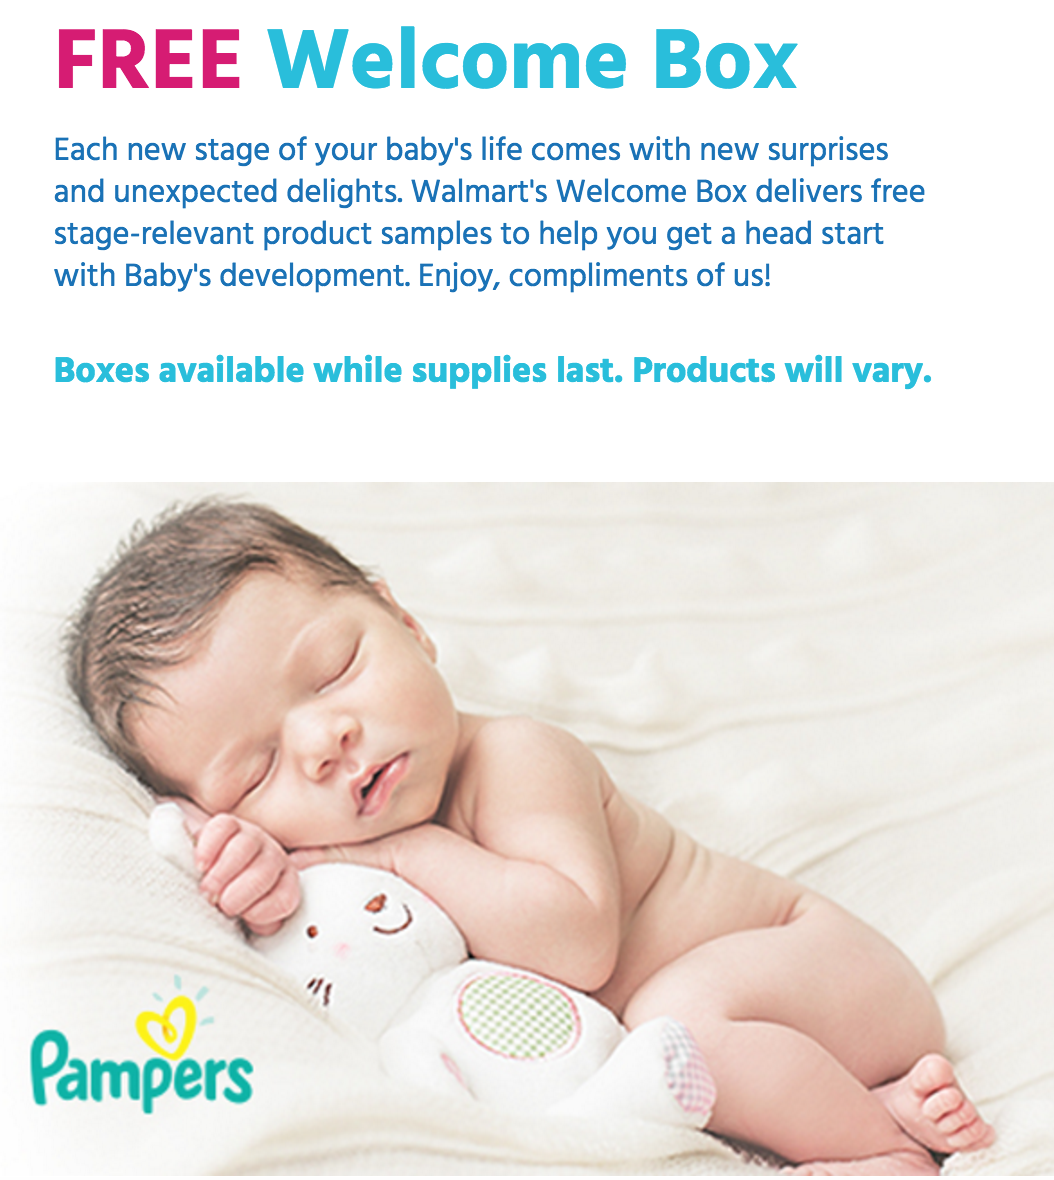 FREE Box of Baby Product Samples from Walmart